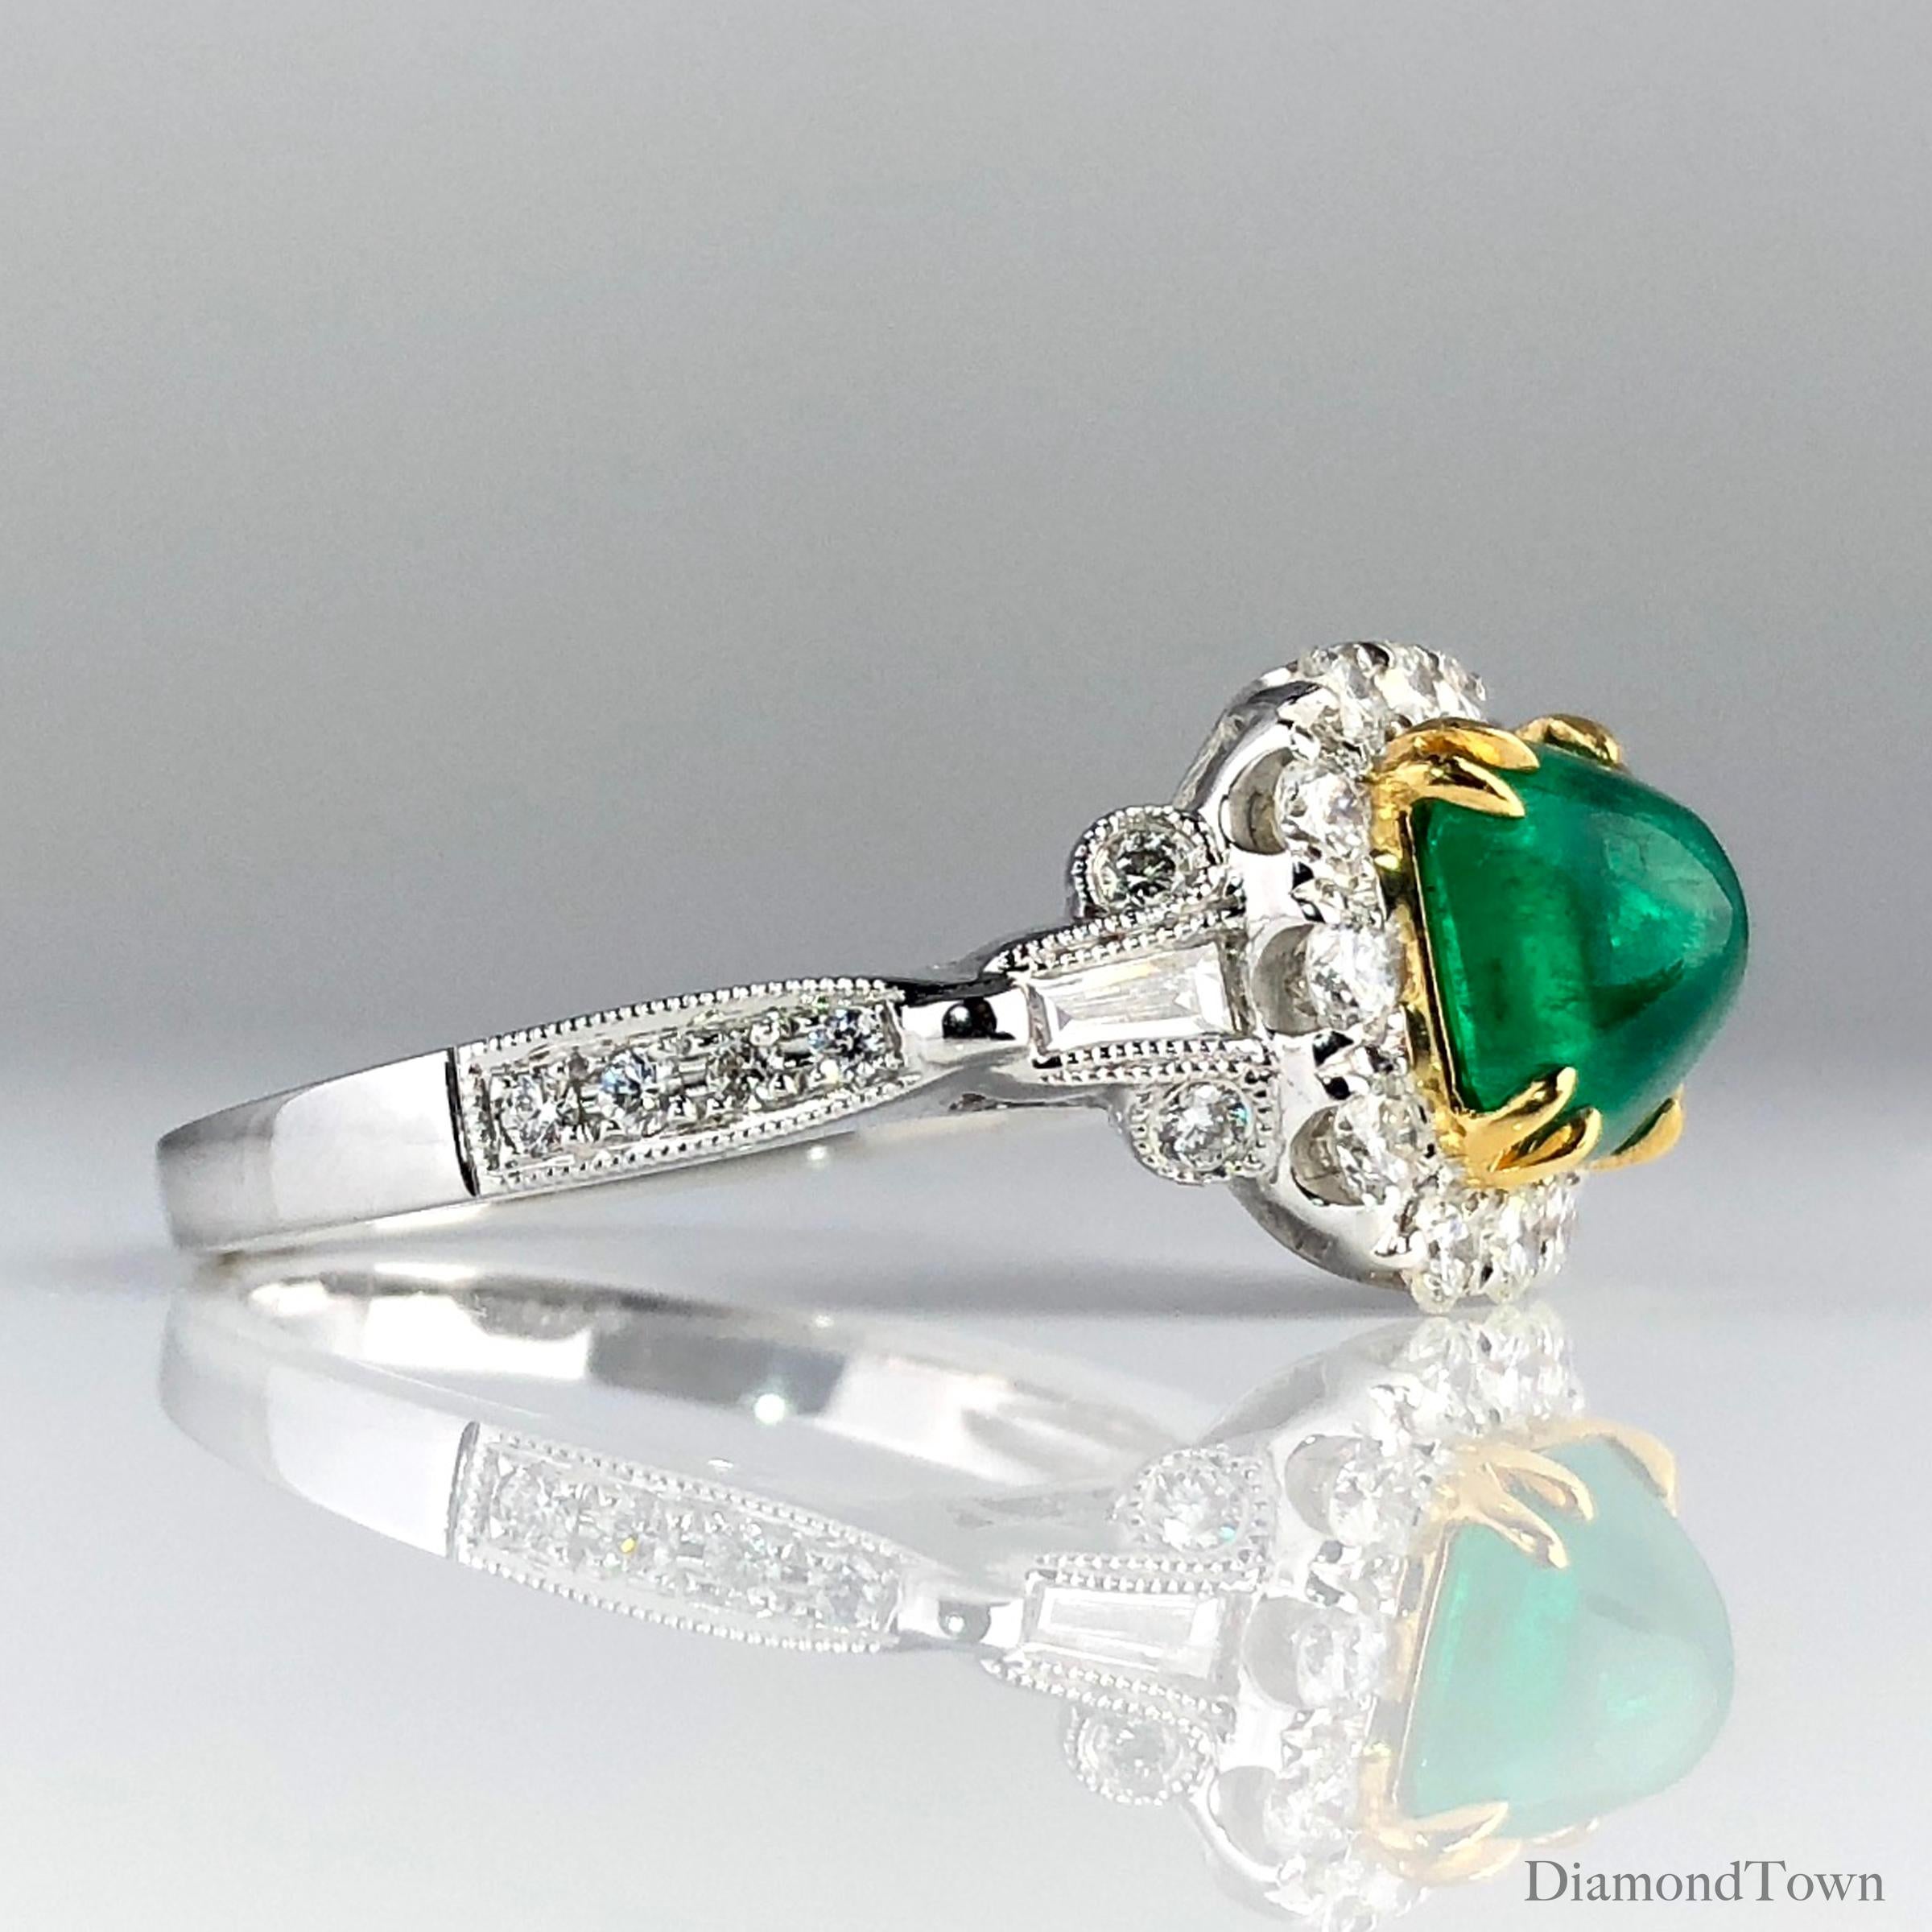 (DiamondTown) This ring features a 1.45 carat sugarloaf Emerald center, surrounded by a square halo of round white diamonds. Two tapered baguettes and additional round diamonds lead down the side shank, bringing the total diamond weight to 0.79